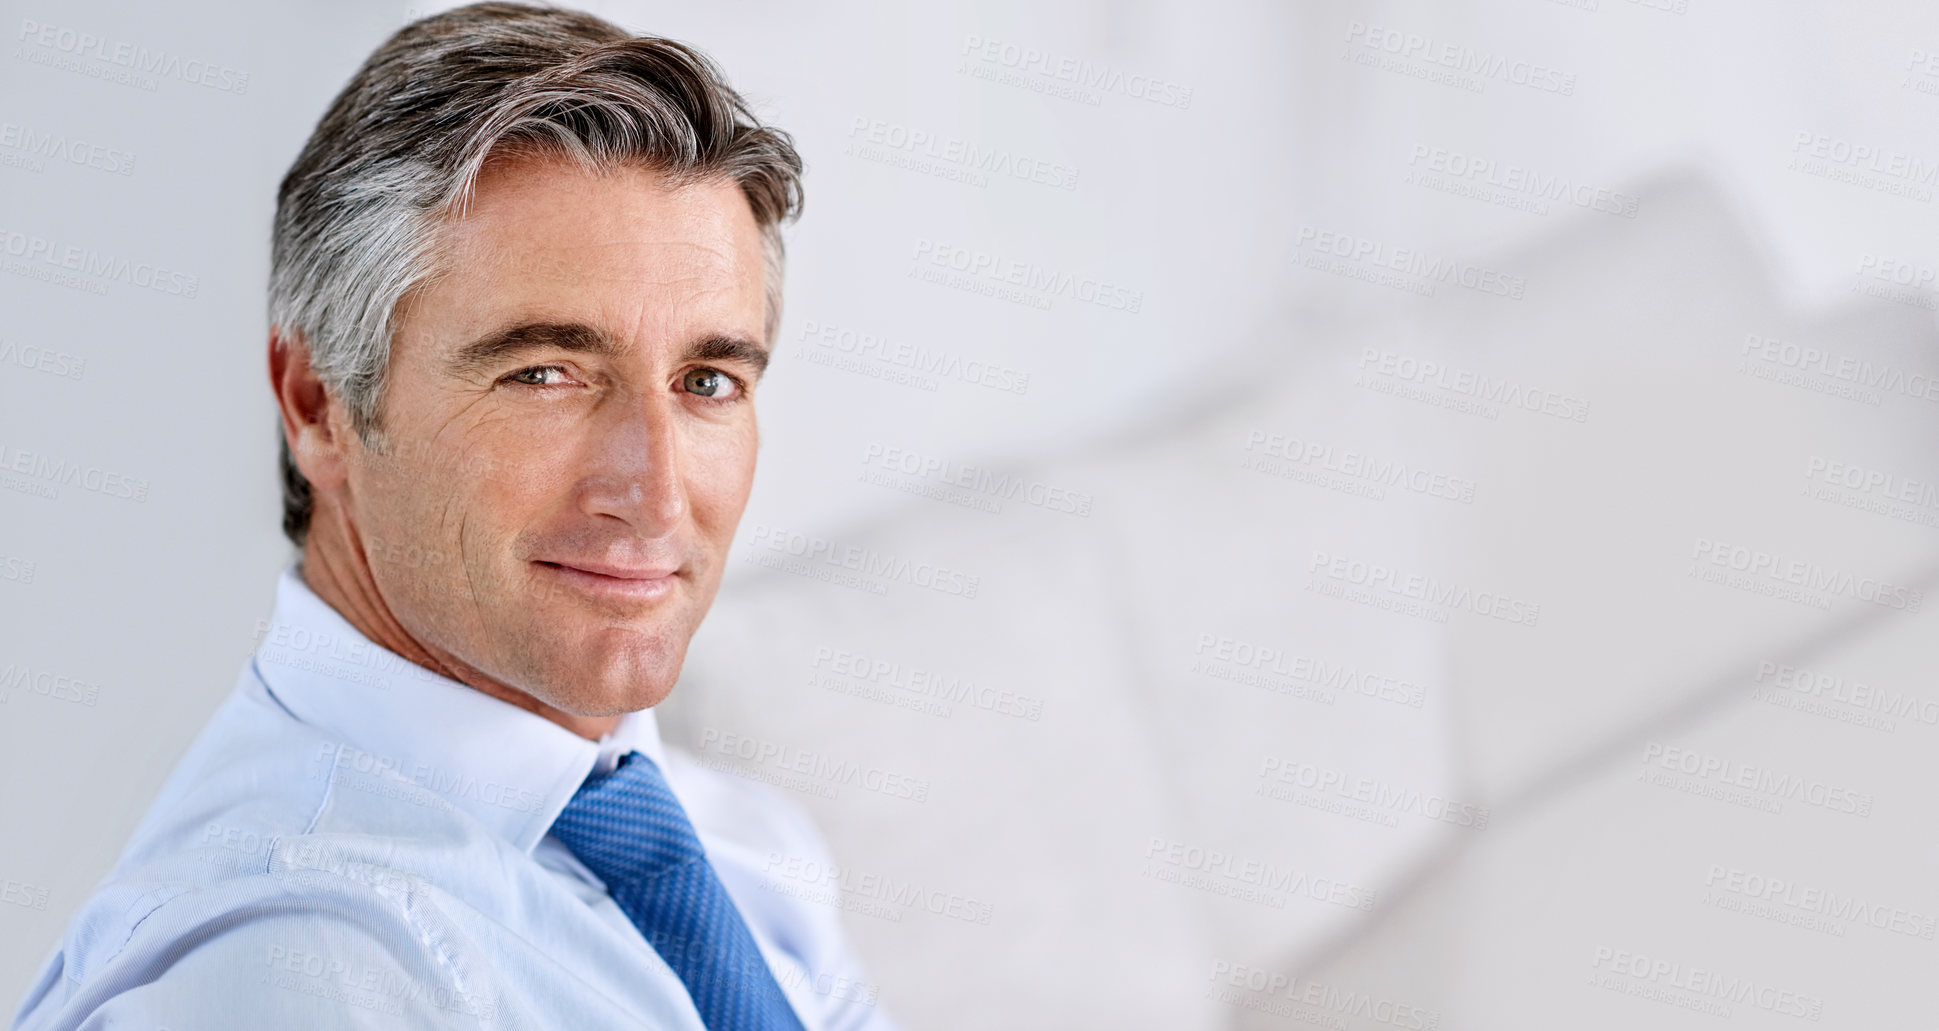 Buy stock photo Headshot of a confident mature businessman wearing a suit and tie while sitting indoors